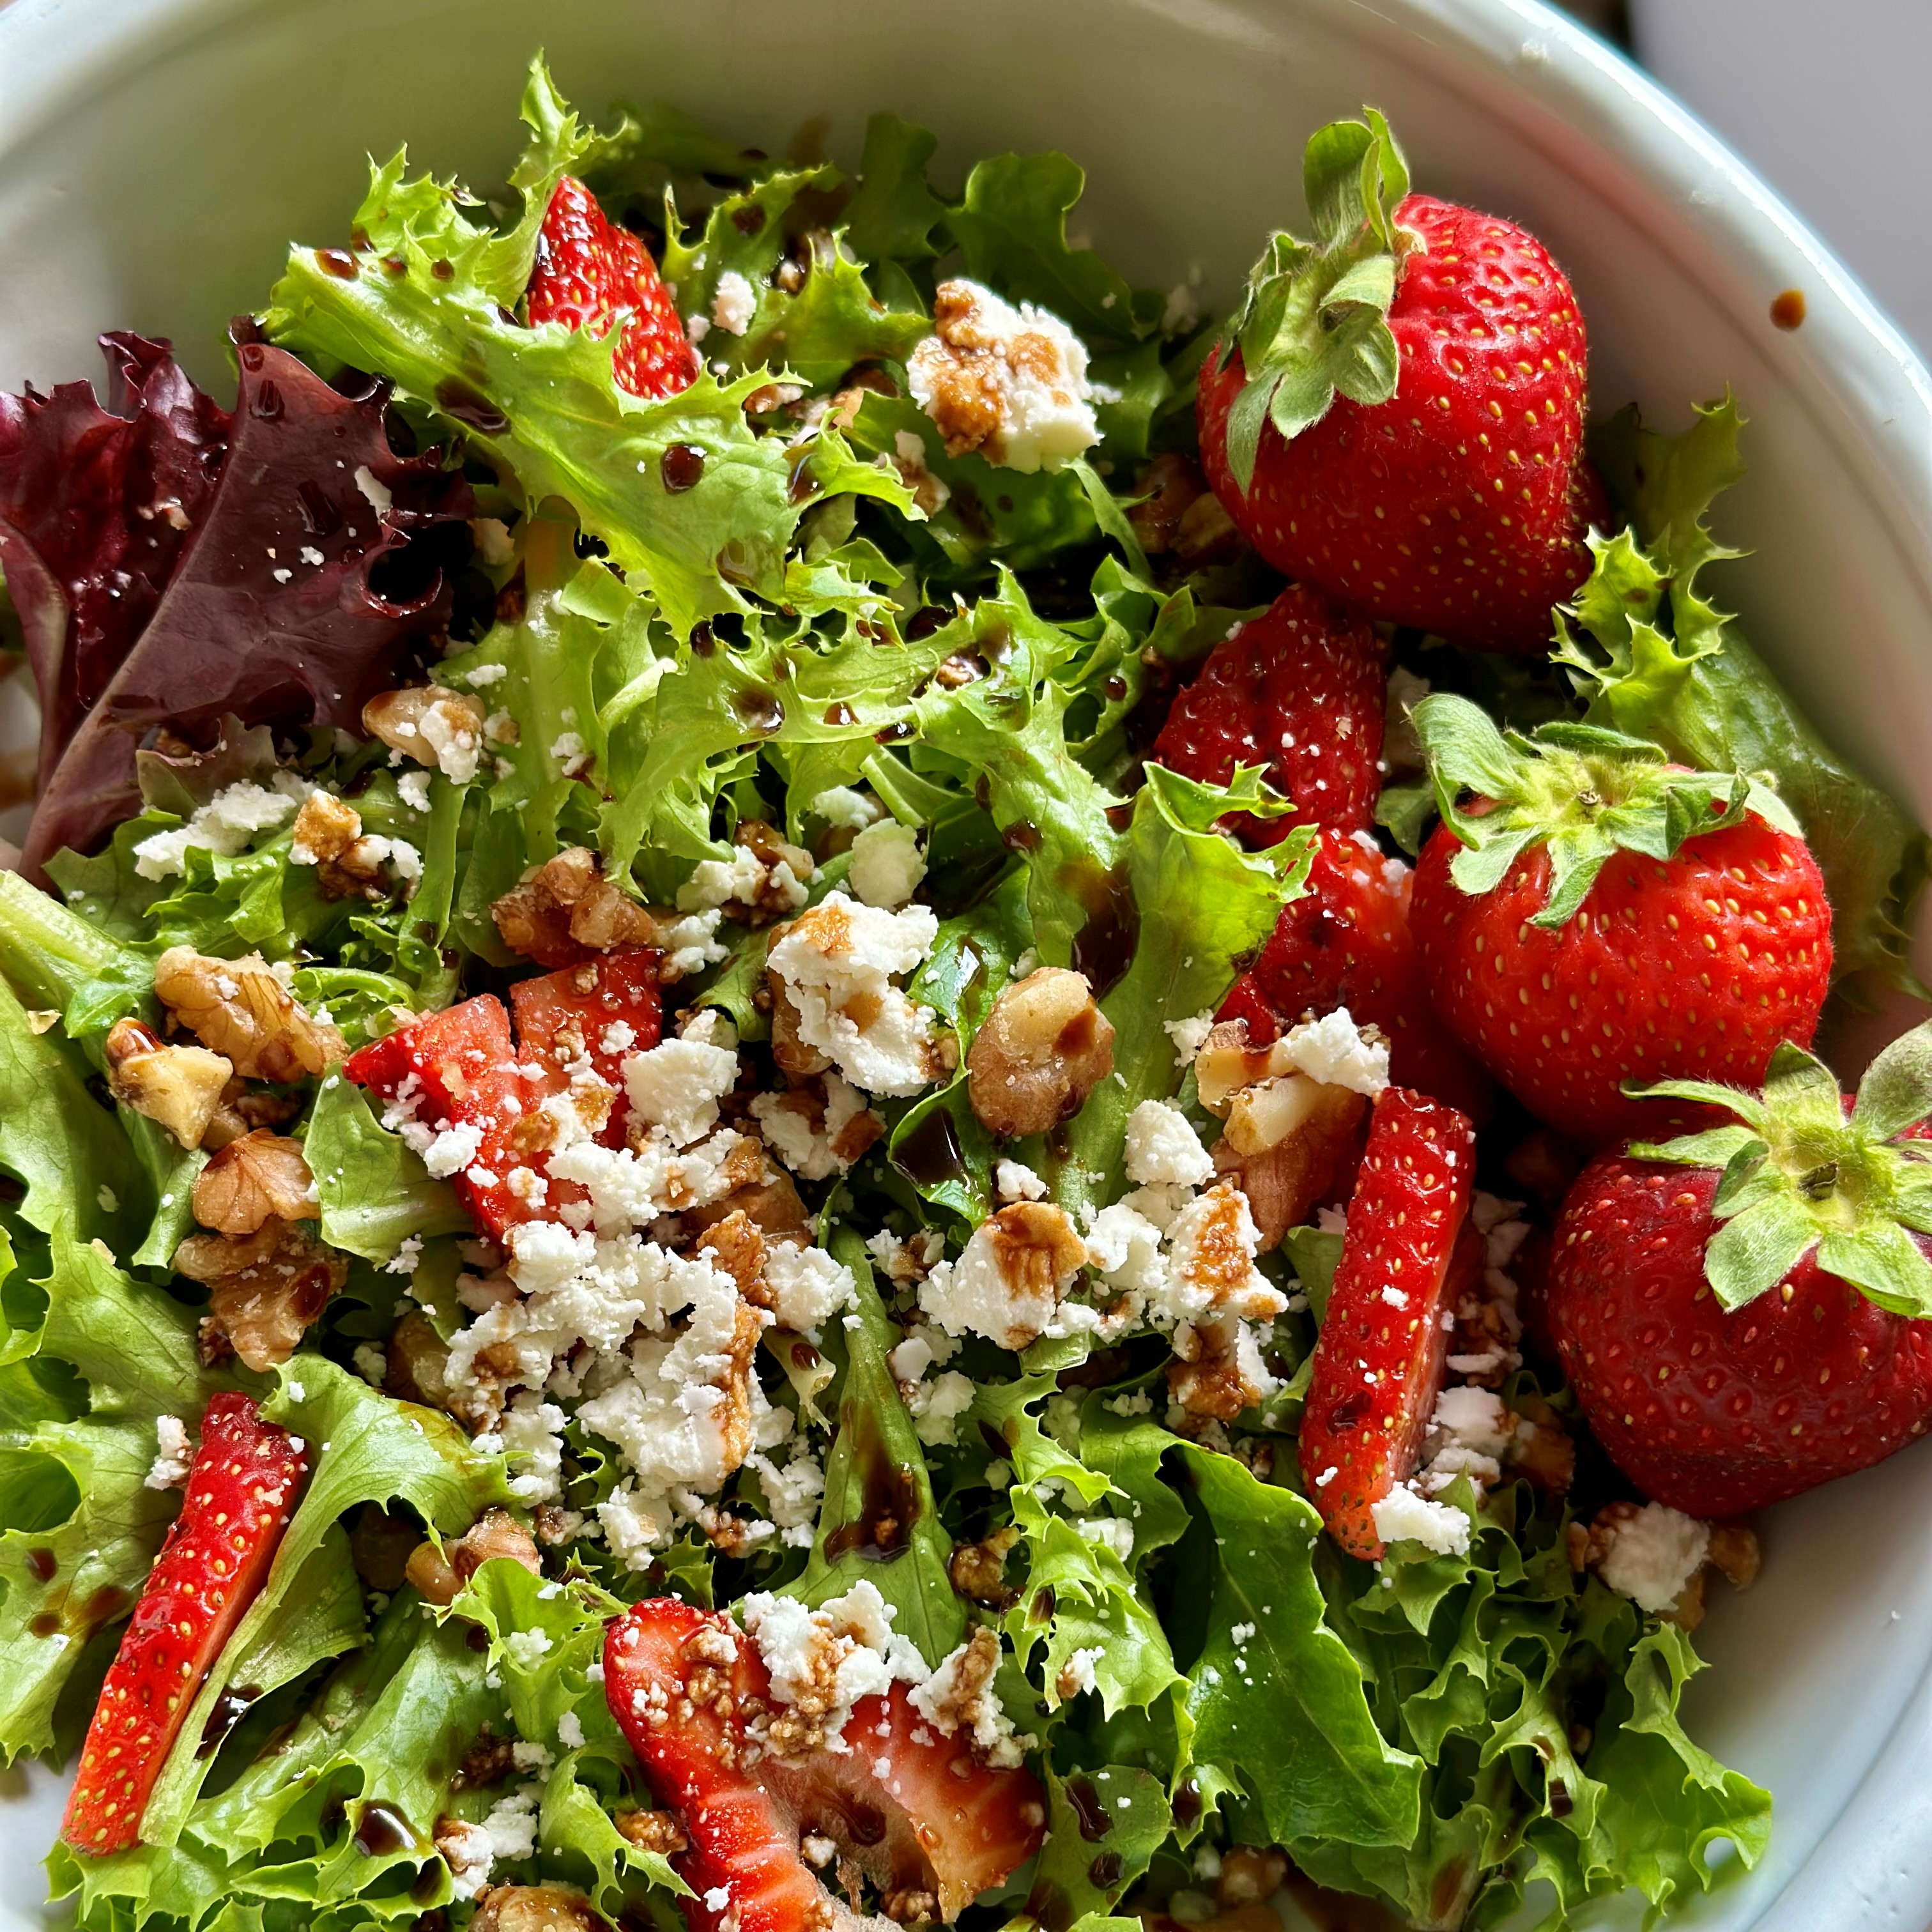 Strawberry Salad with Balsamic Dressing